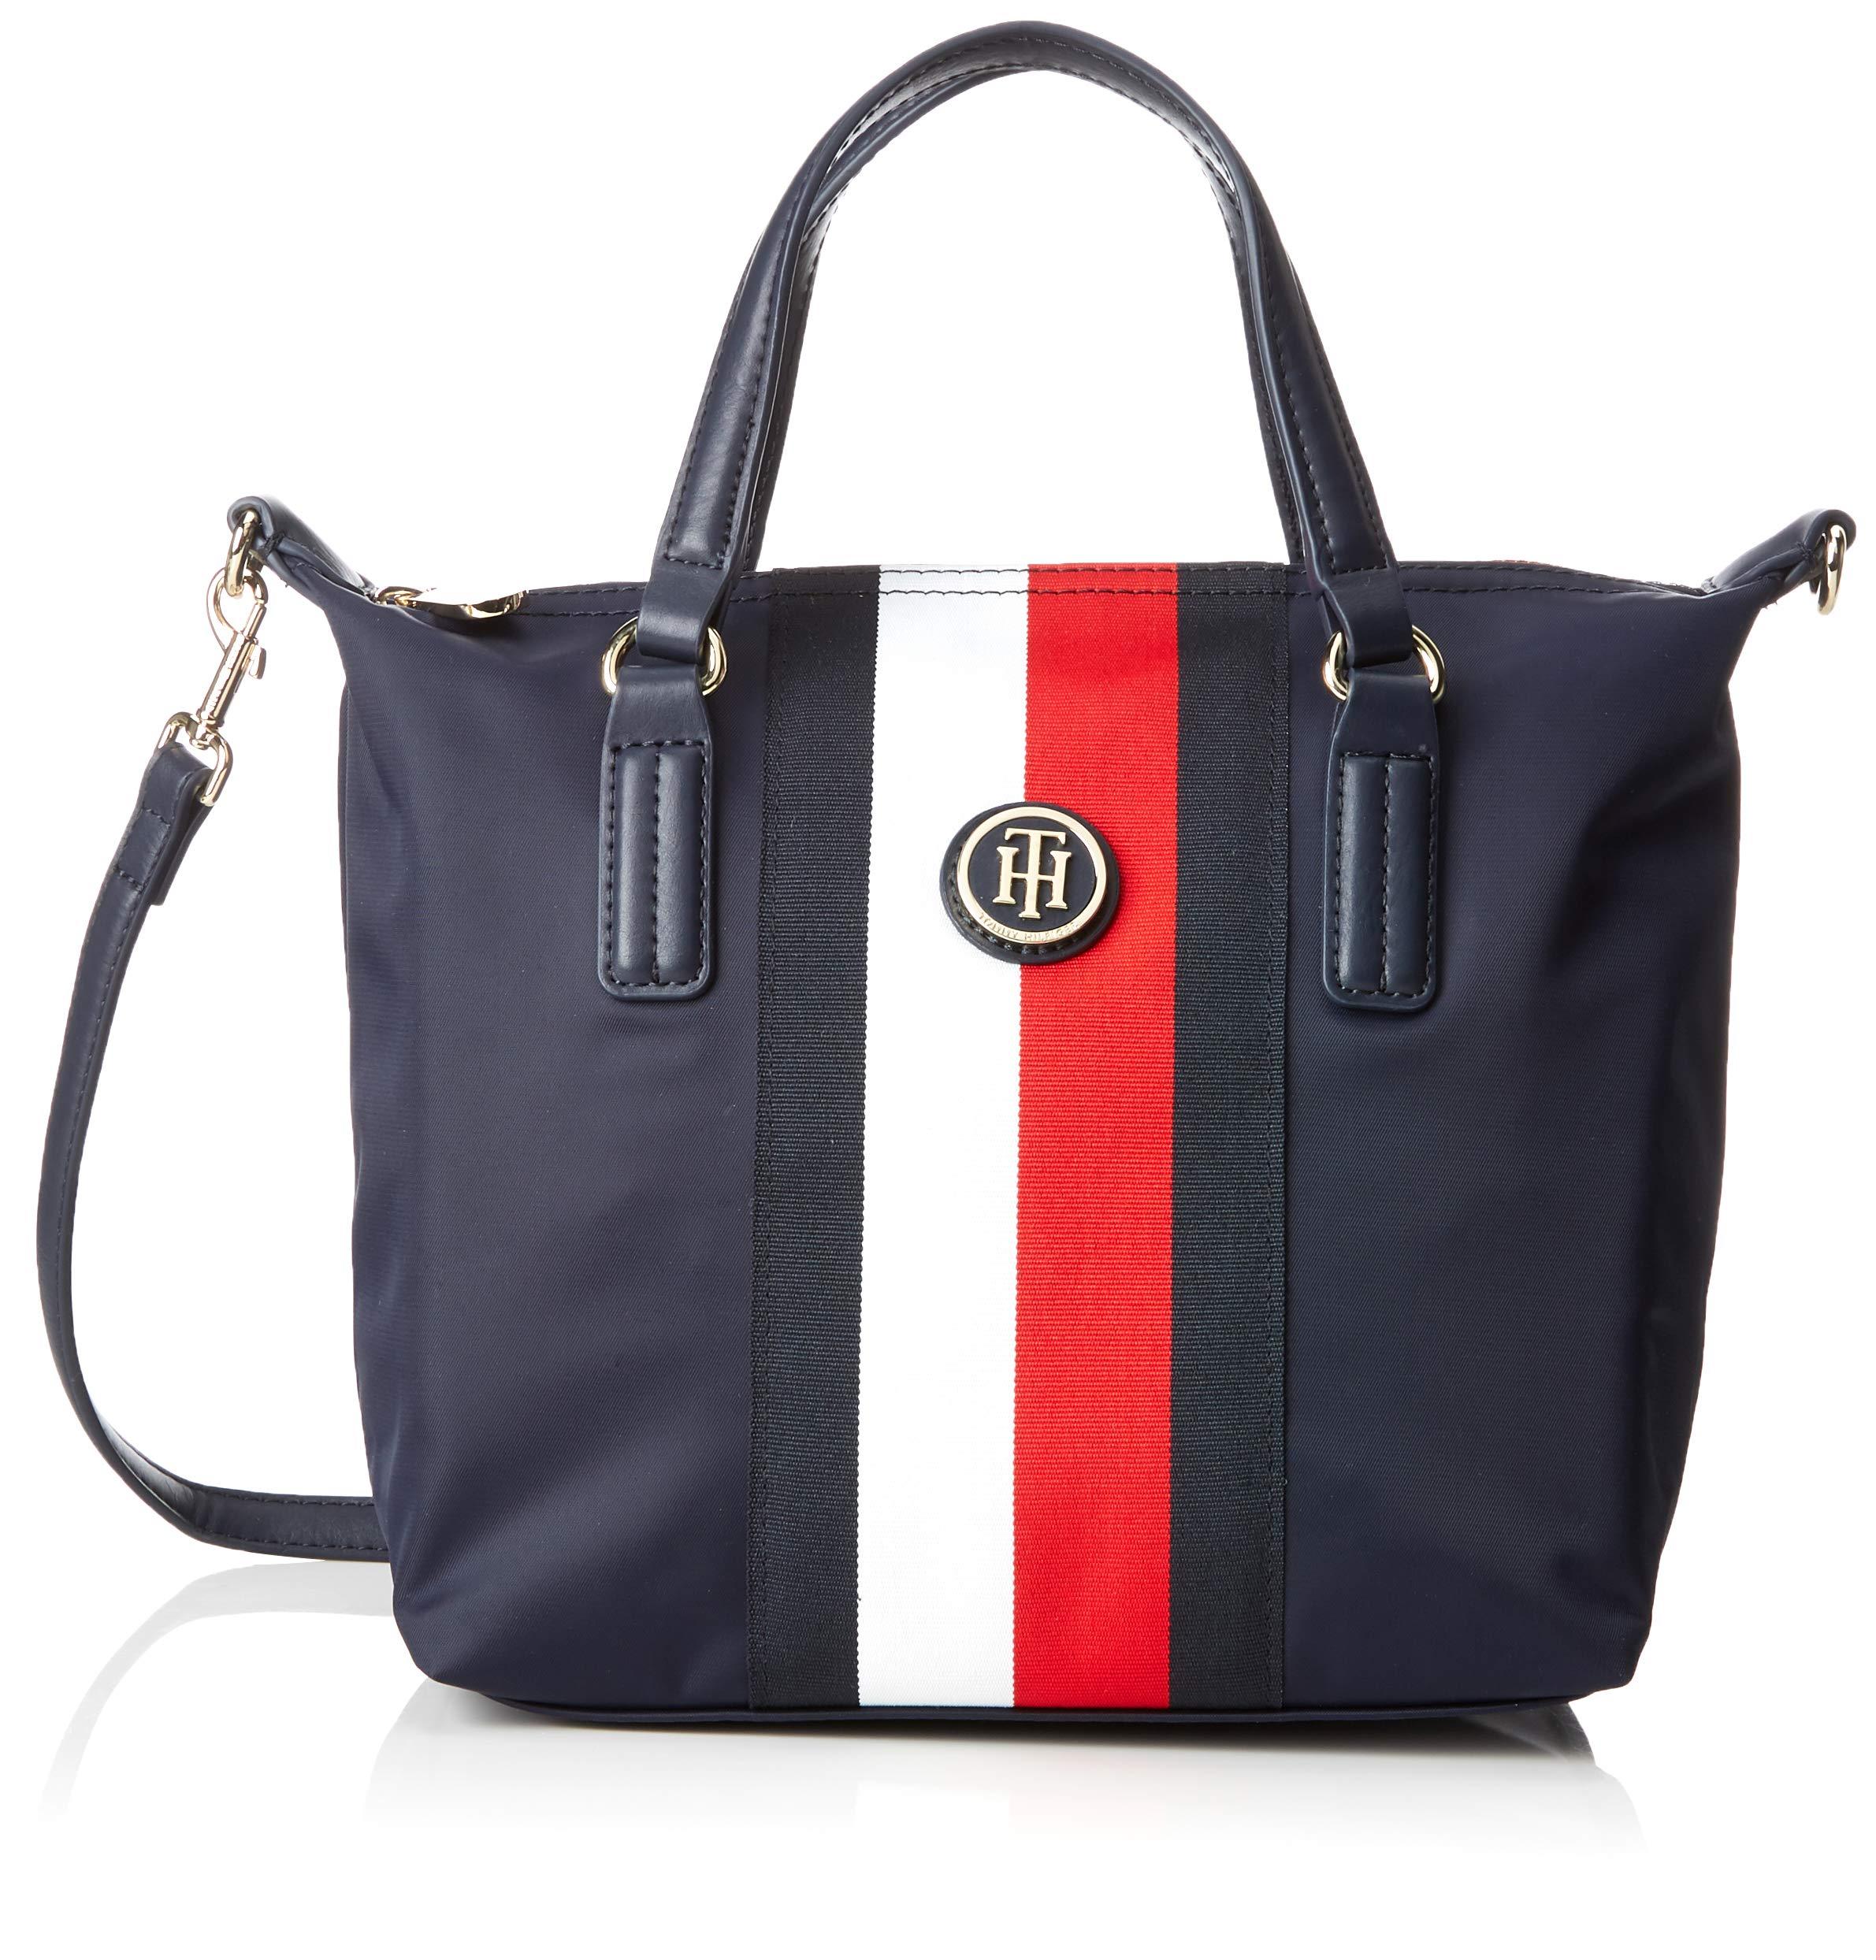 poppy small tote tommy hilfiger